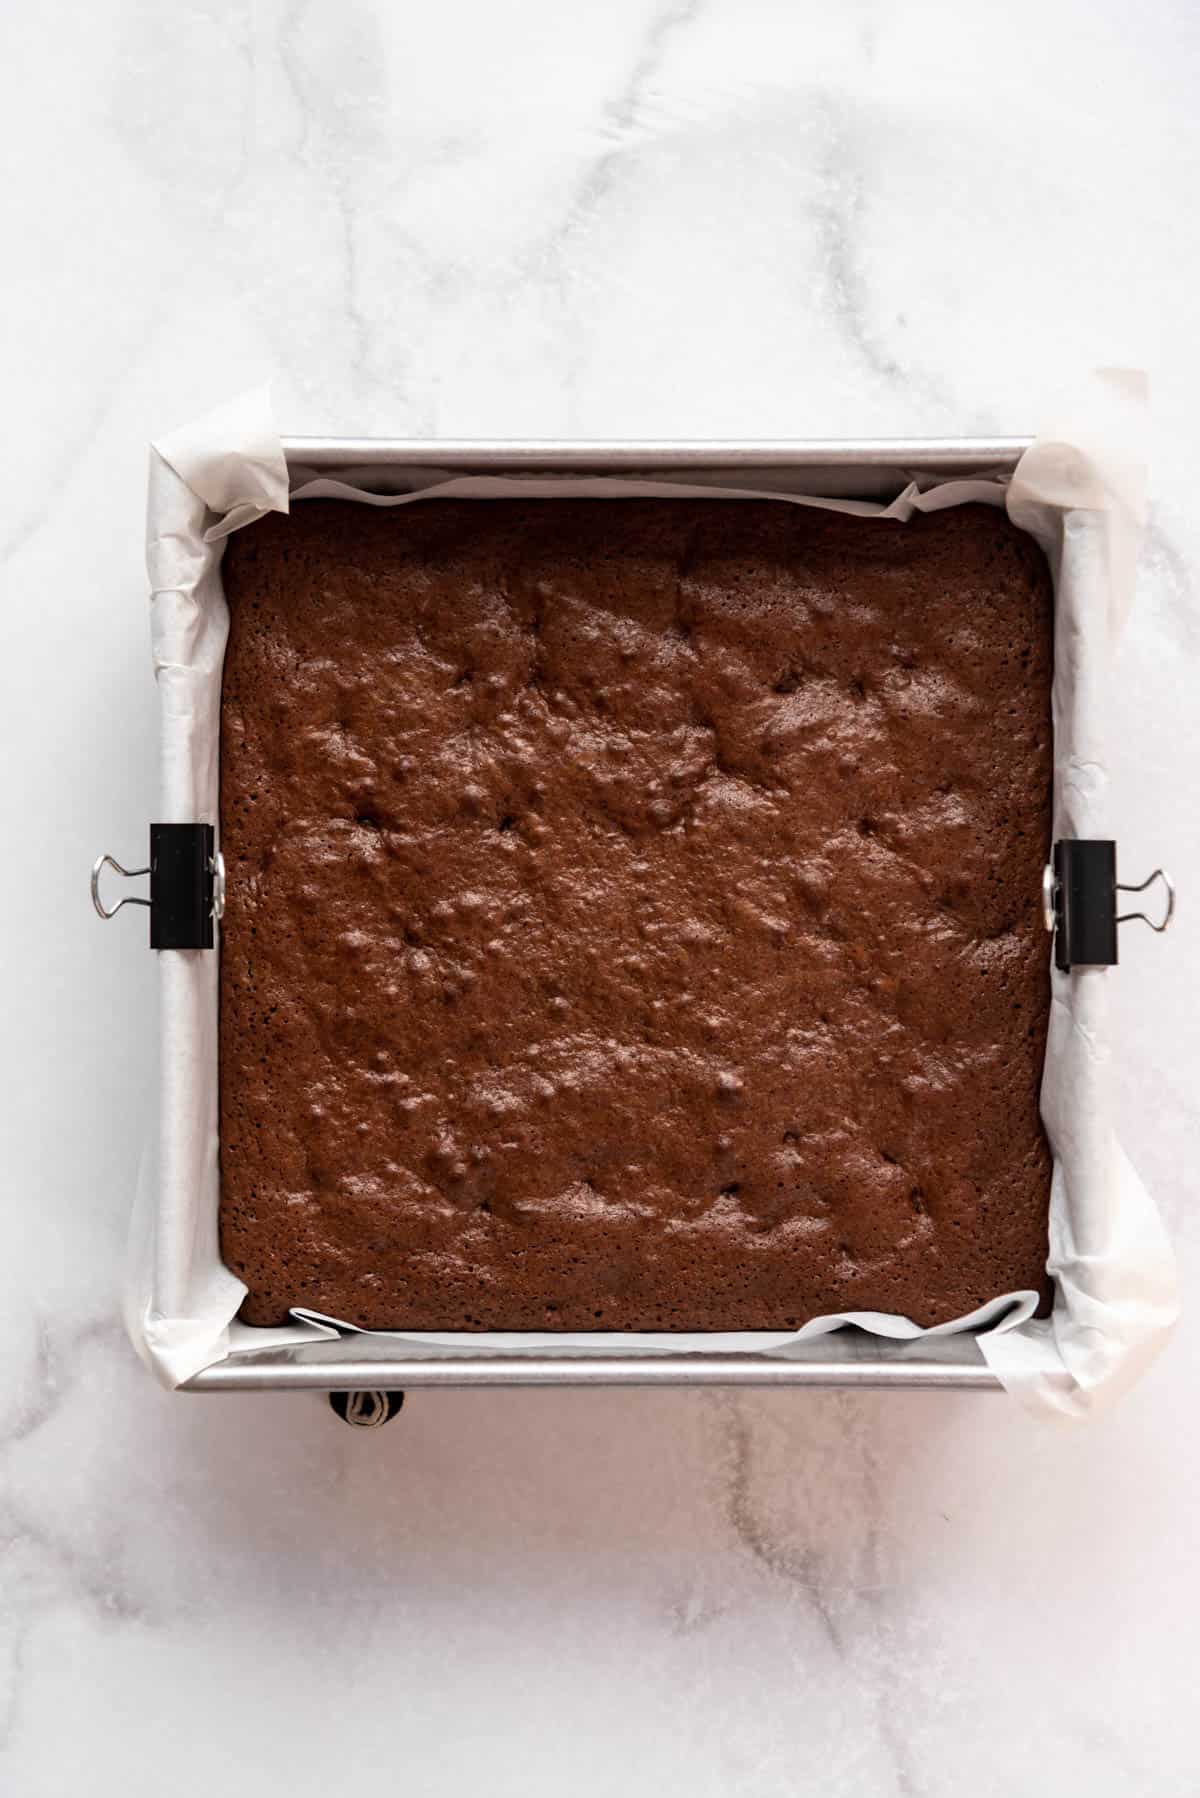 Homemade brownies in a square baking pan.